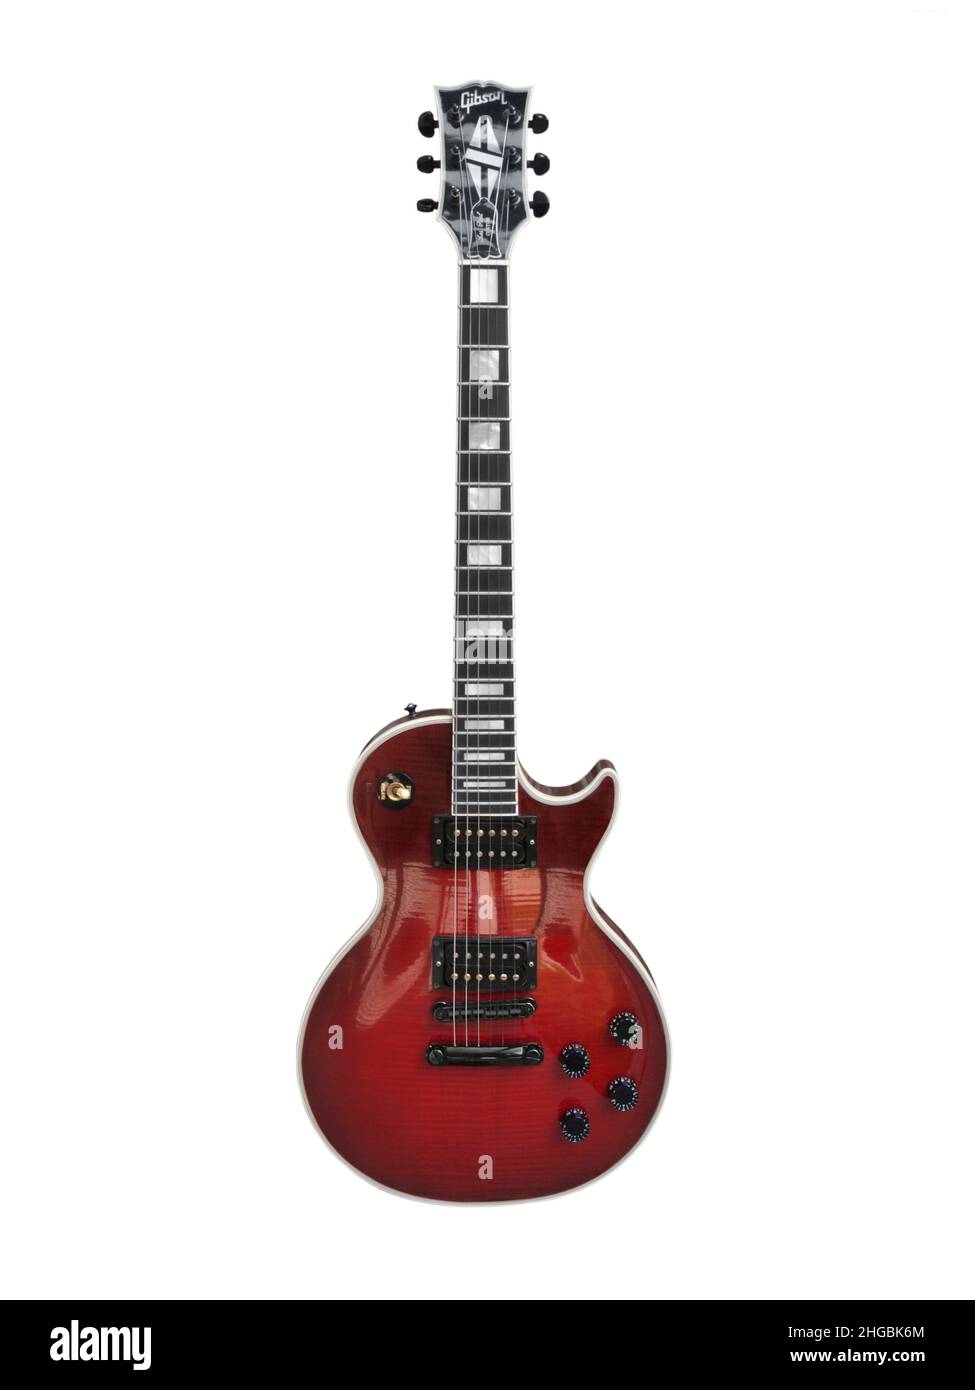 Illustrative editorial photo of a red Gibson Les Paul Custom guitar with white background on August 26, 2009 in Los Angeles, California, USA. Stock Photo